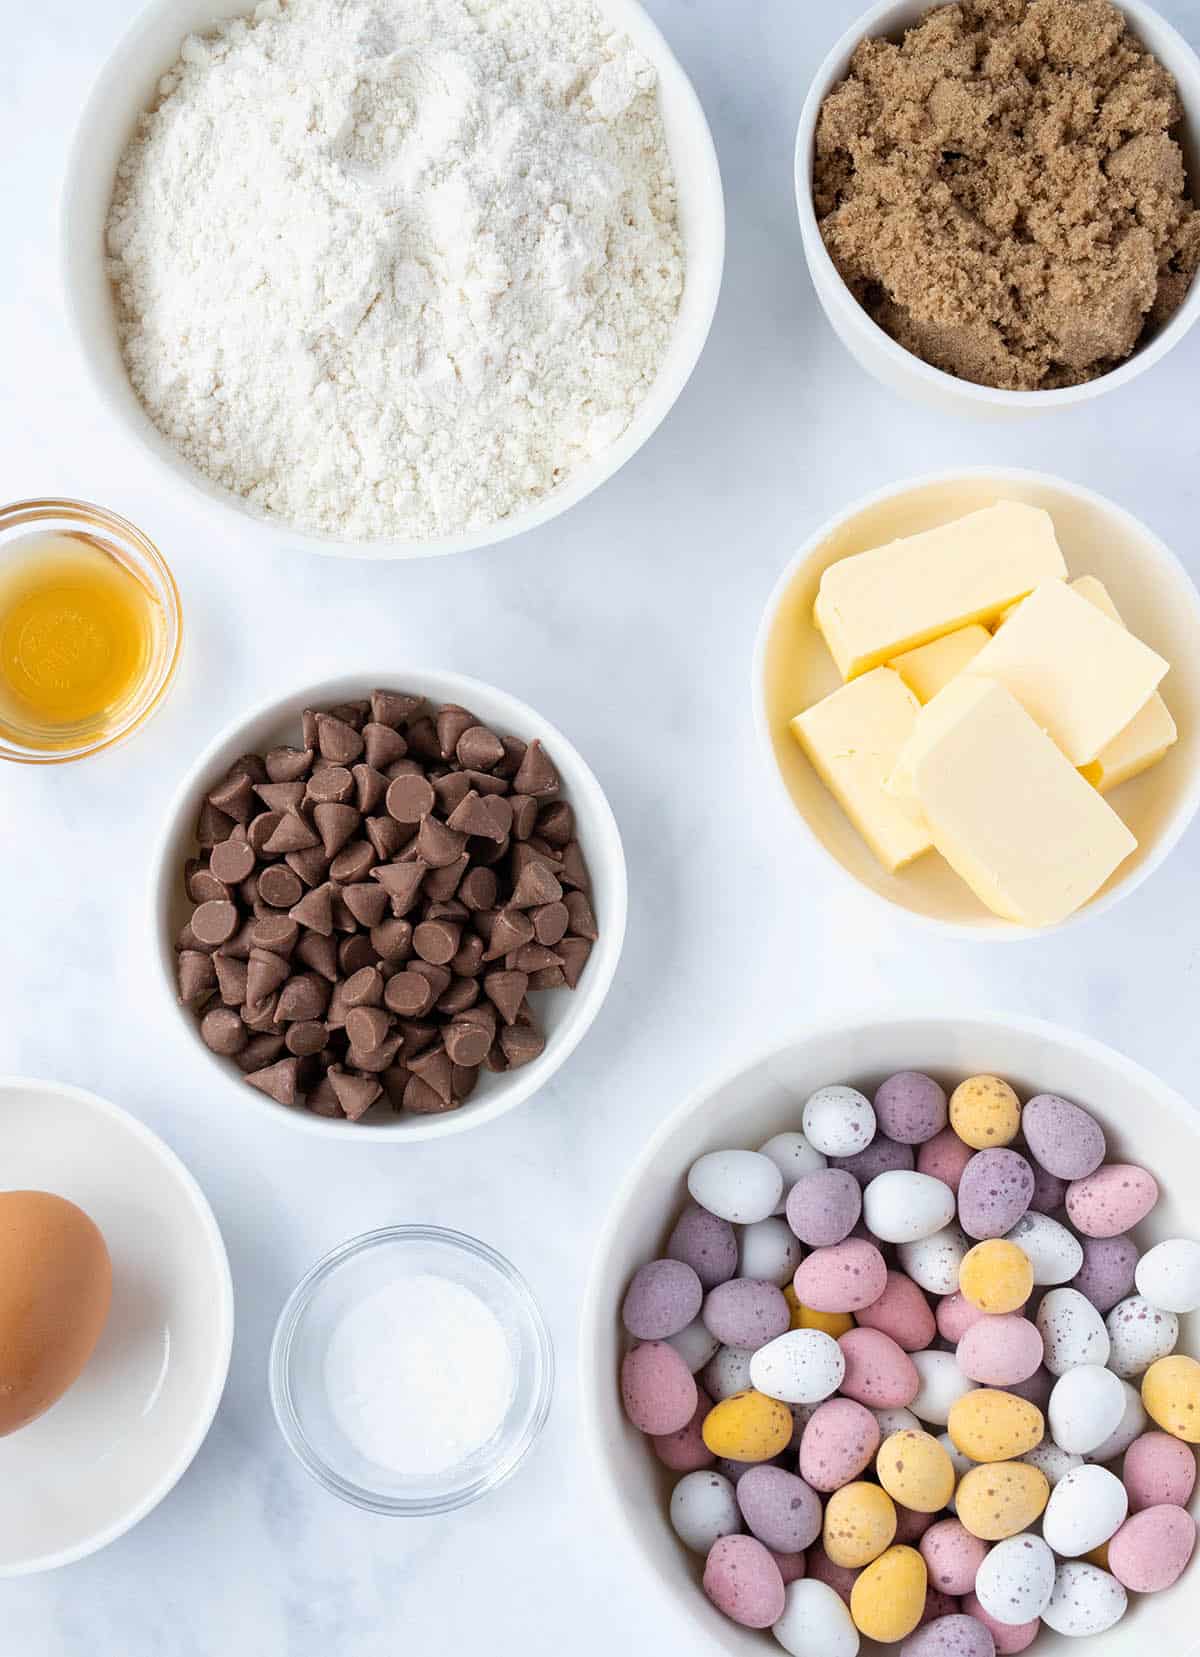 All the ingredients needed to make Mini Egg Cookies sitting on a marble backdrop.